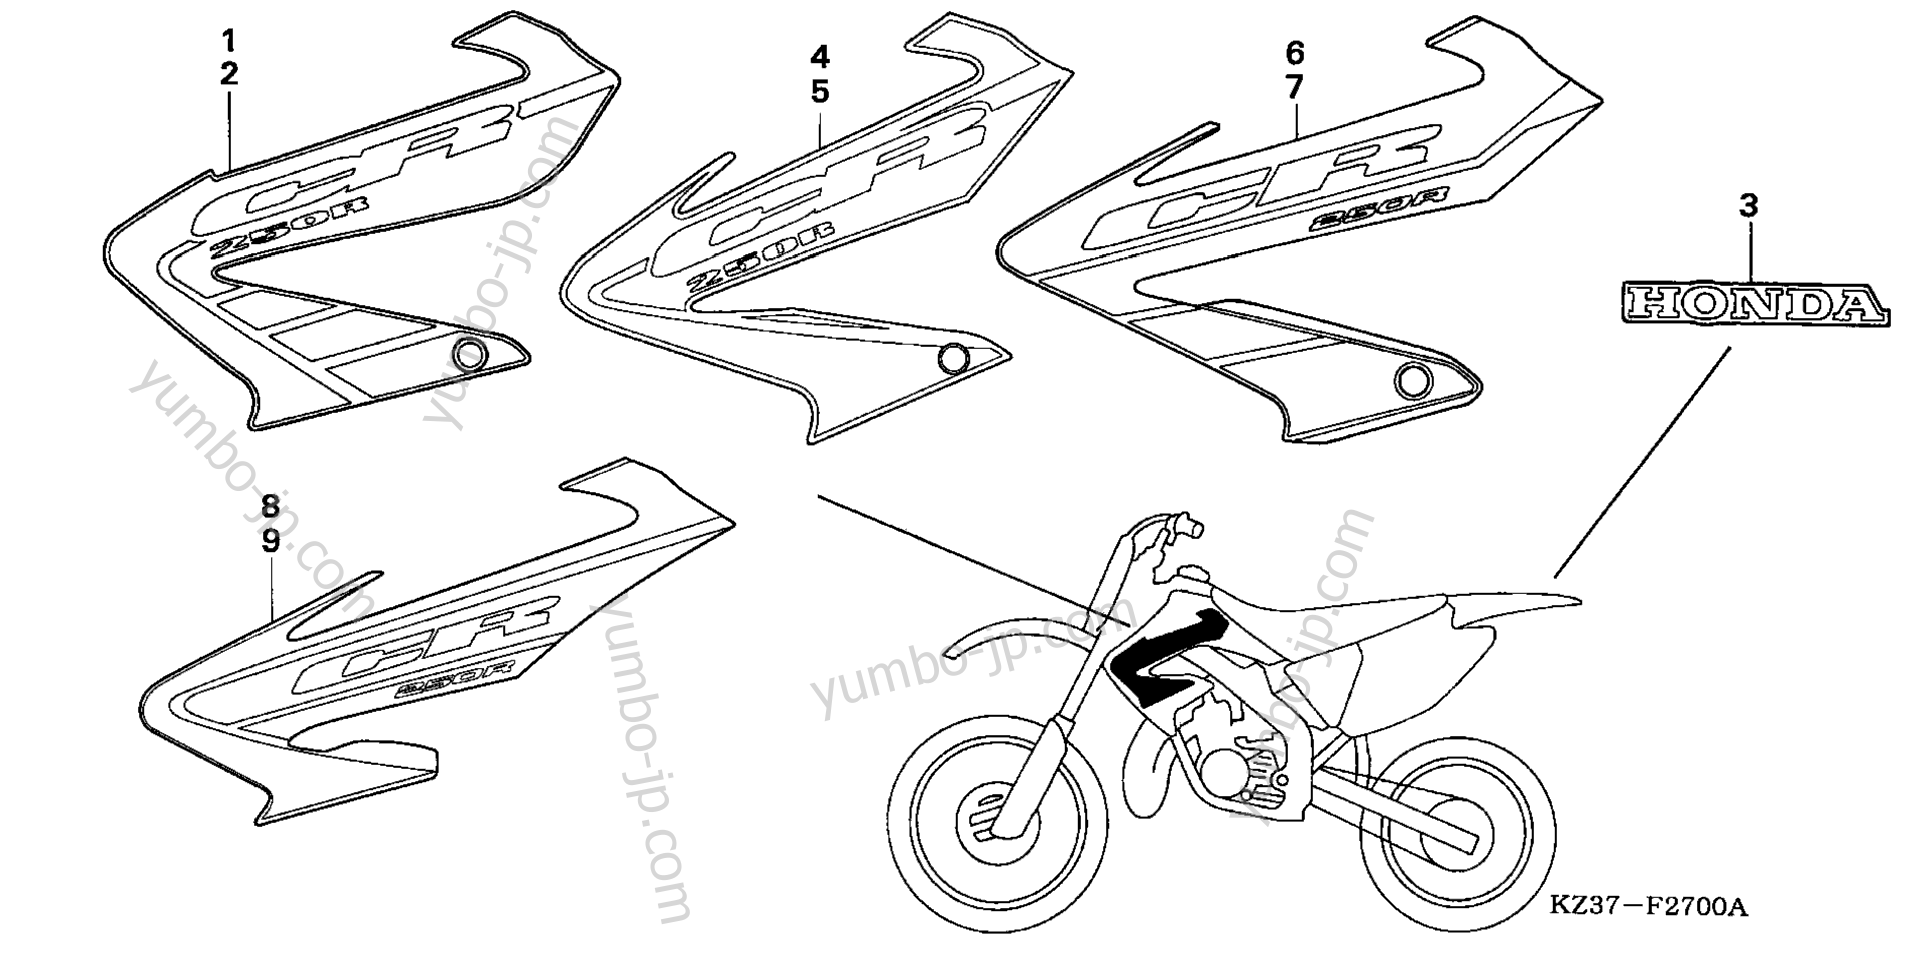 MARKS ('02-'05) for motorcycles HONDA CR250R A 2002 year